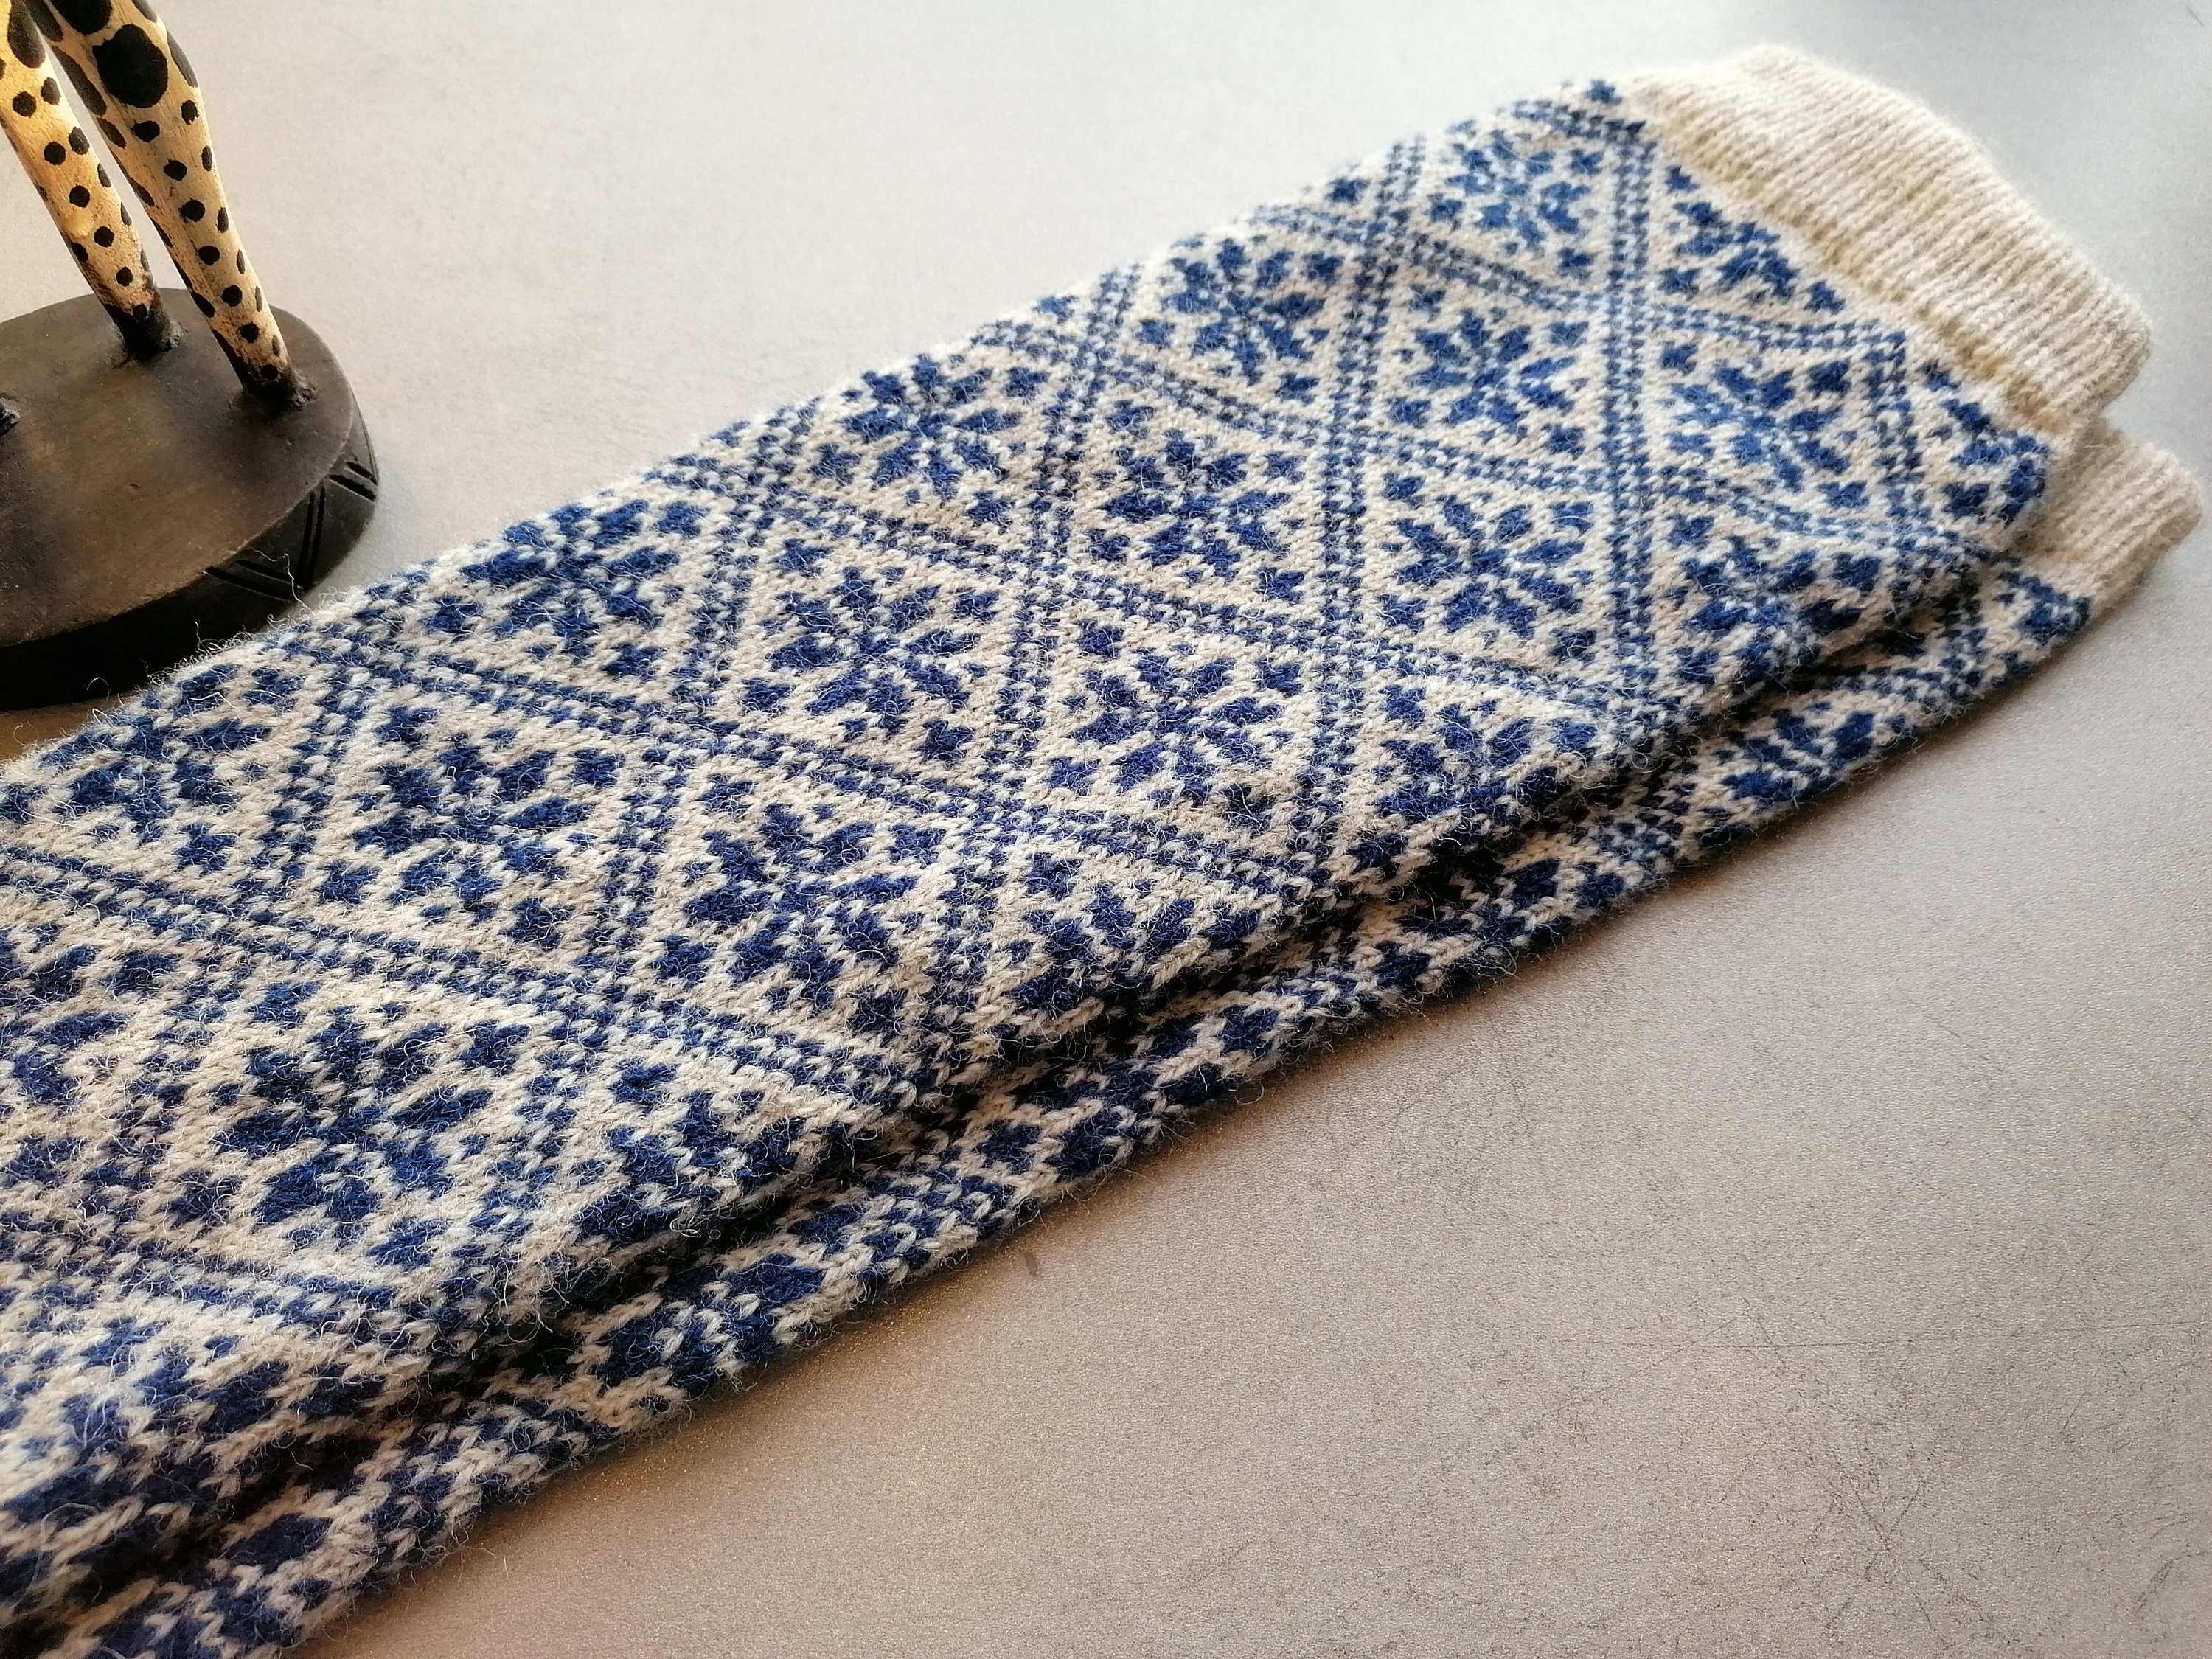 Fair Isle Leg Warmers Finely Knitted Small Nordic Star Pattern Light Grey  and Blue Combination, Good for Walking. Gift for Her. -  Canada